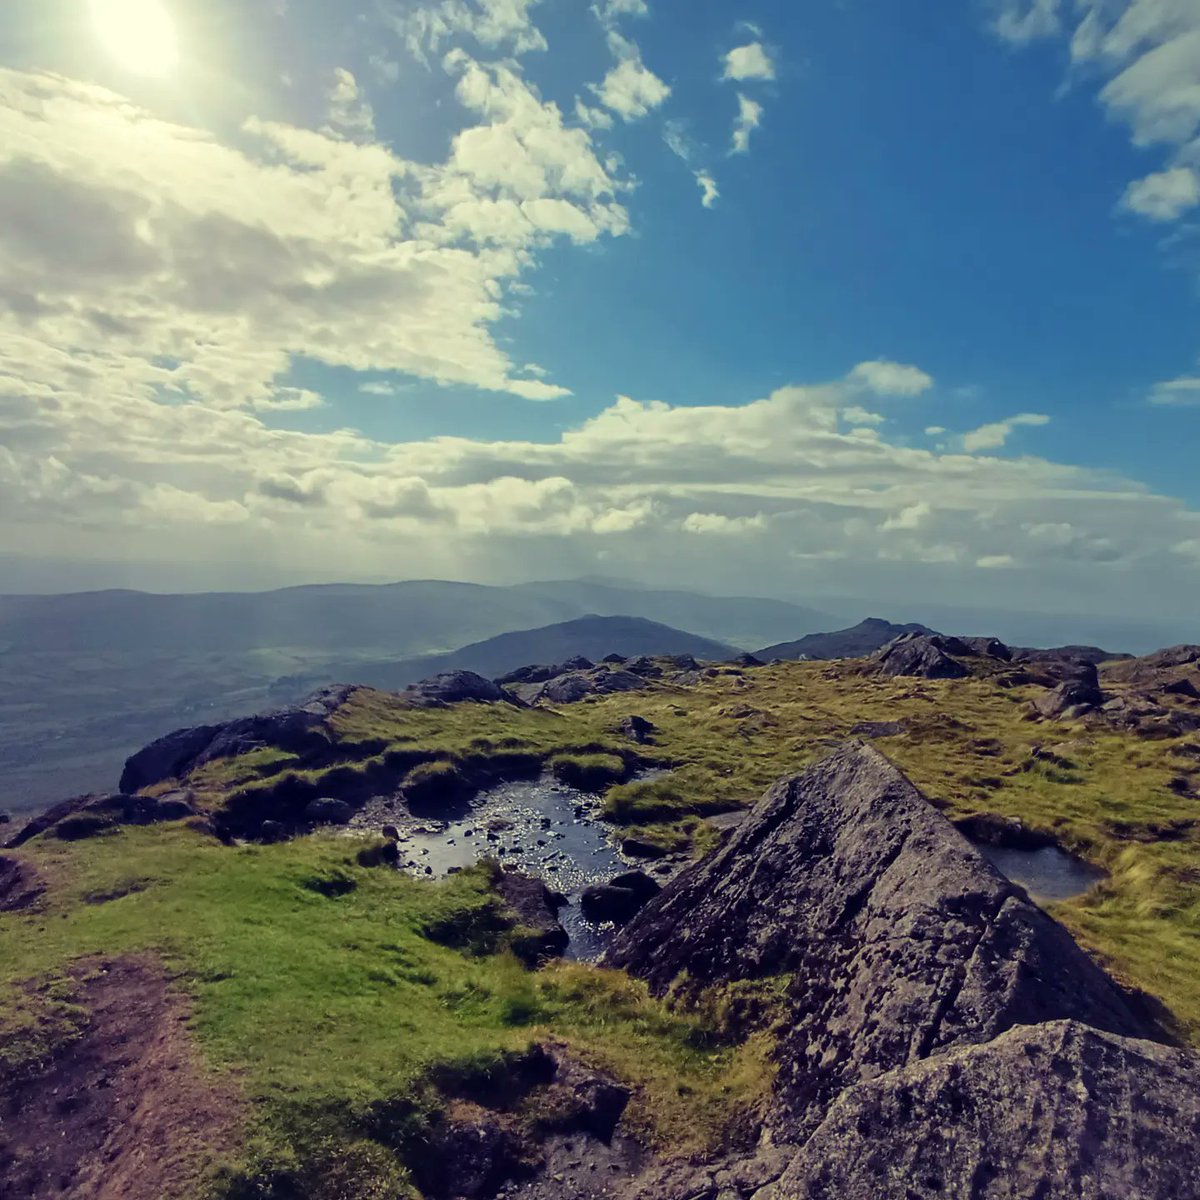 Slieve Foye 589m is a mountain on the Cooley Peninsula. Clear horizon & climb with a view !

#slievefoye #cooleymountains 
#carlingford #Peninsula #hike 
#Louth #lanscapes #photography
#nature #travel #mountainview